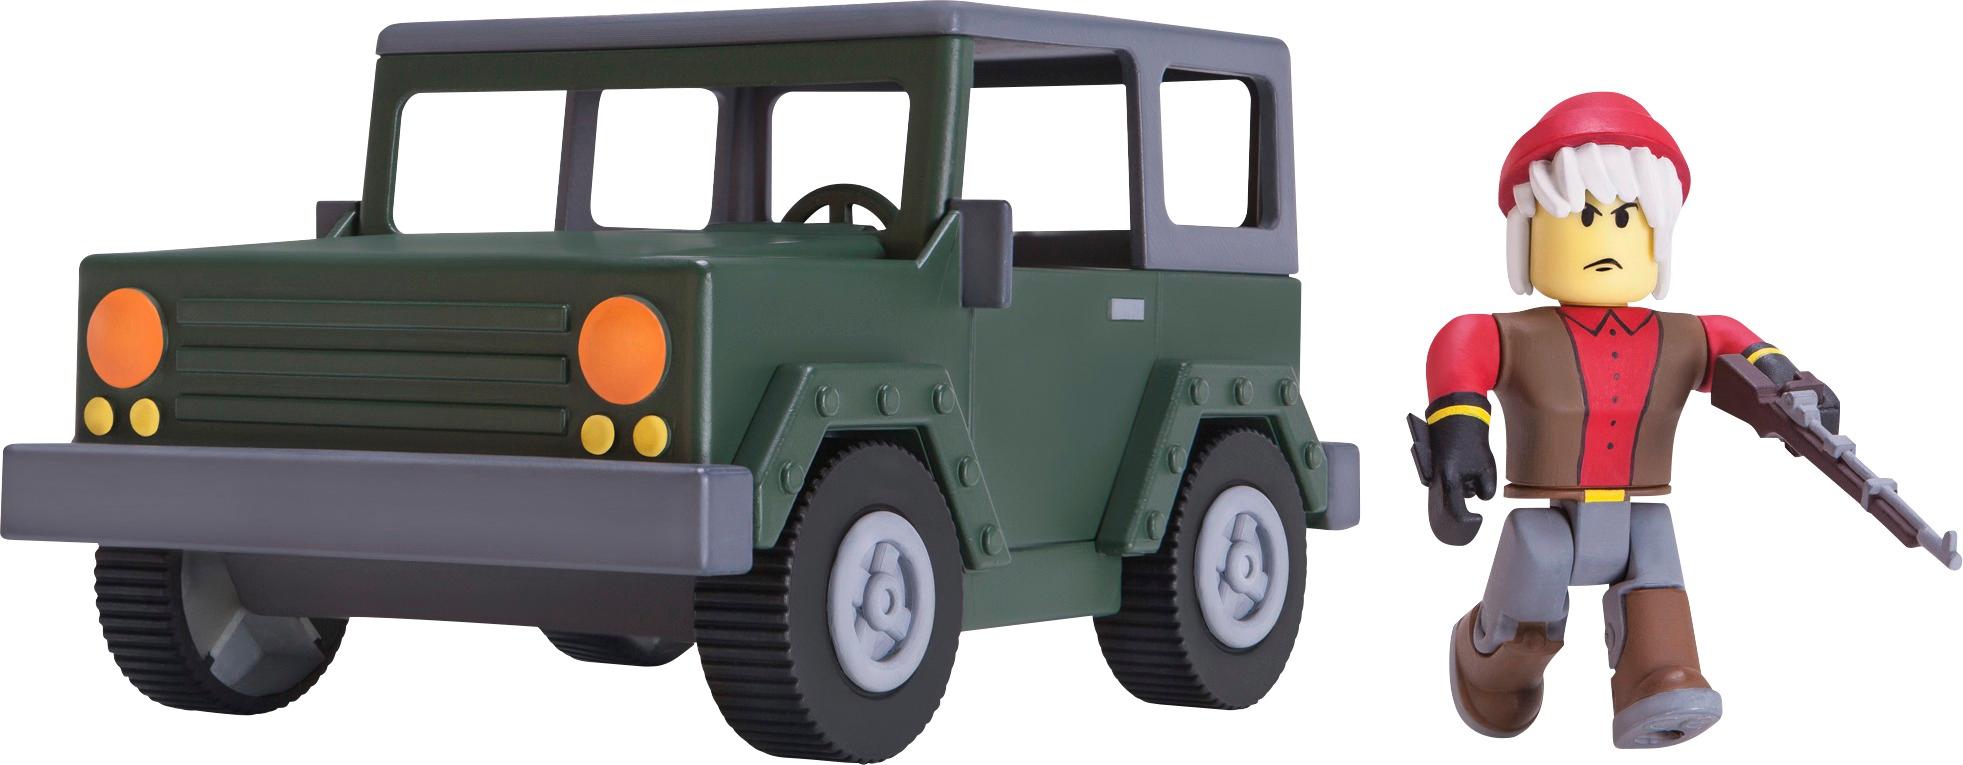 Best Buy Roblox Large Vehicle Styles May Vary 10770 - roblox toys swat vehicle